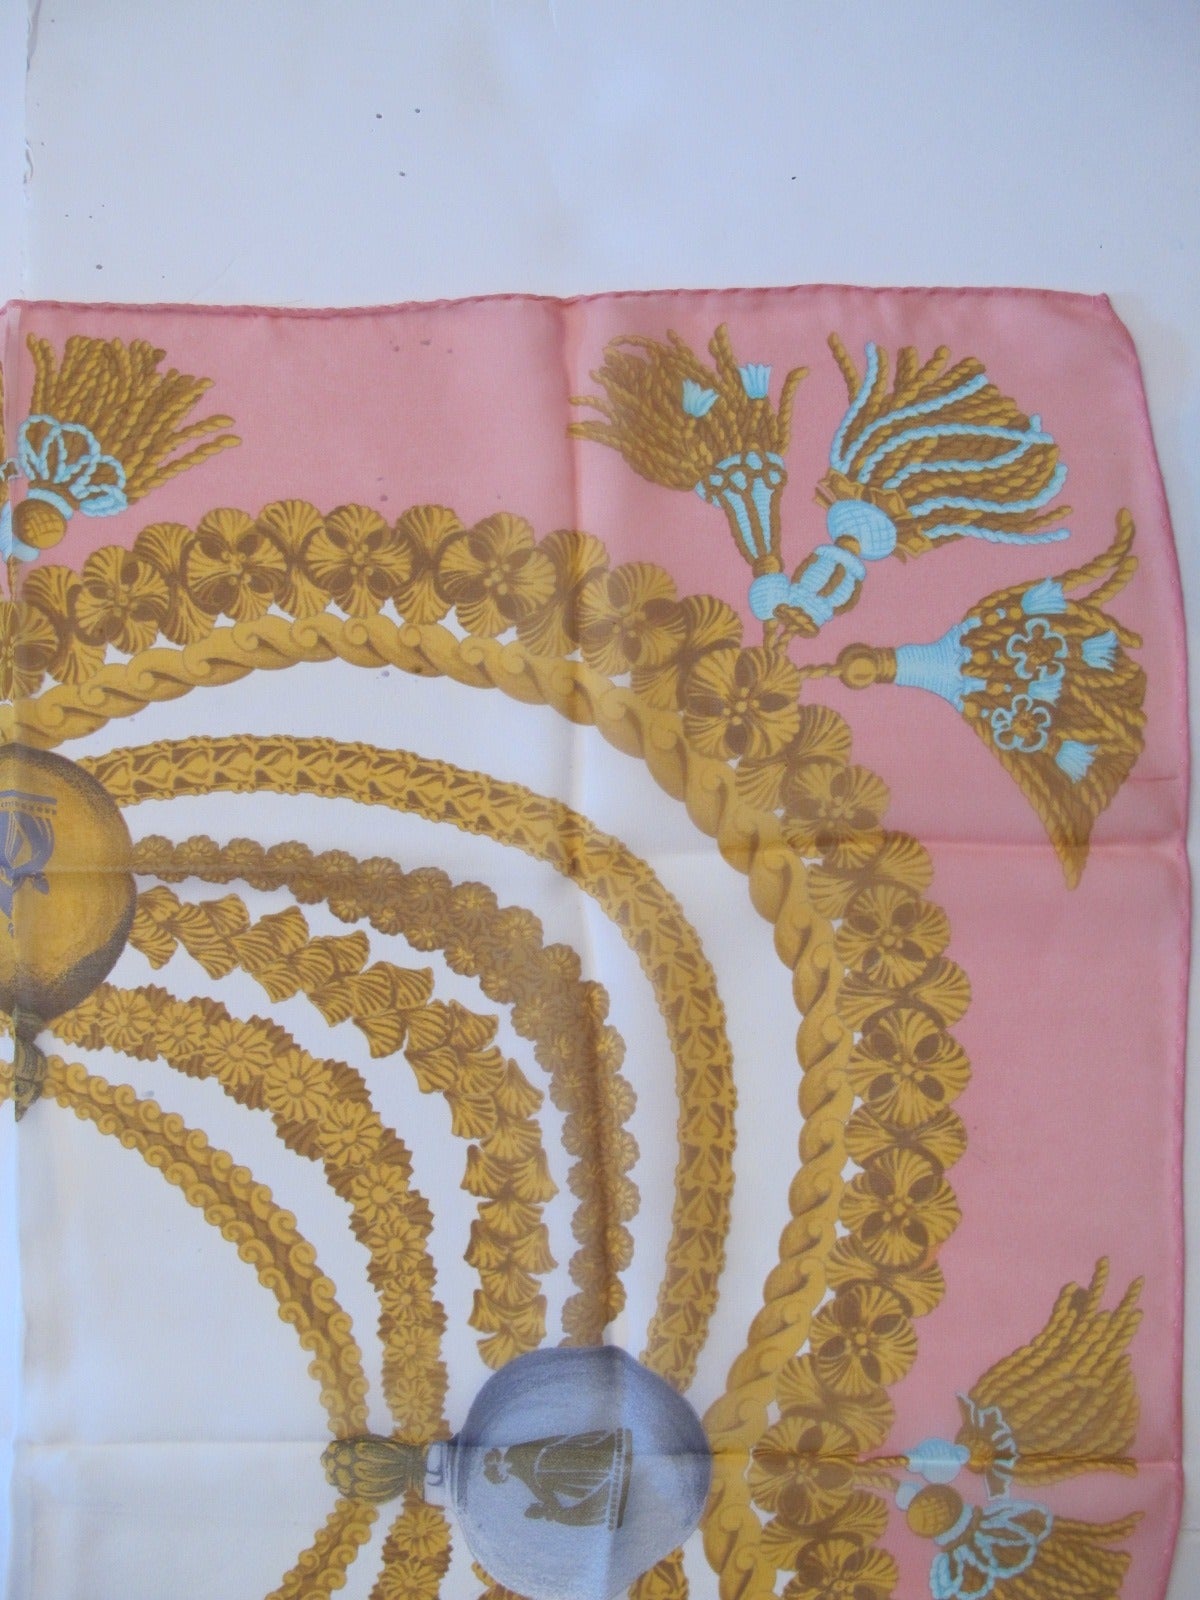 1960's Vintage Lanvin Scarf with Perfume Bottles and Tassels For Sale 1